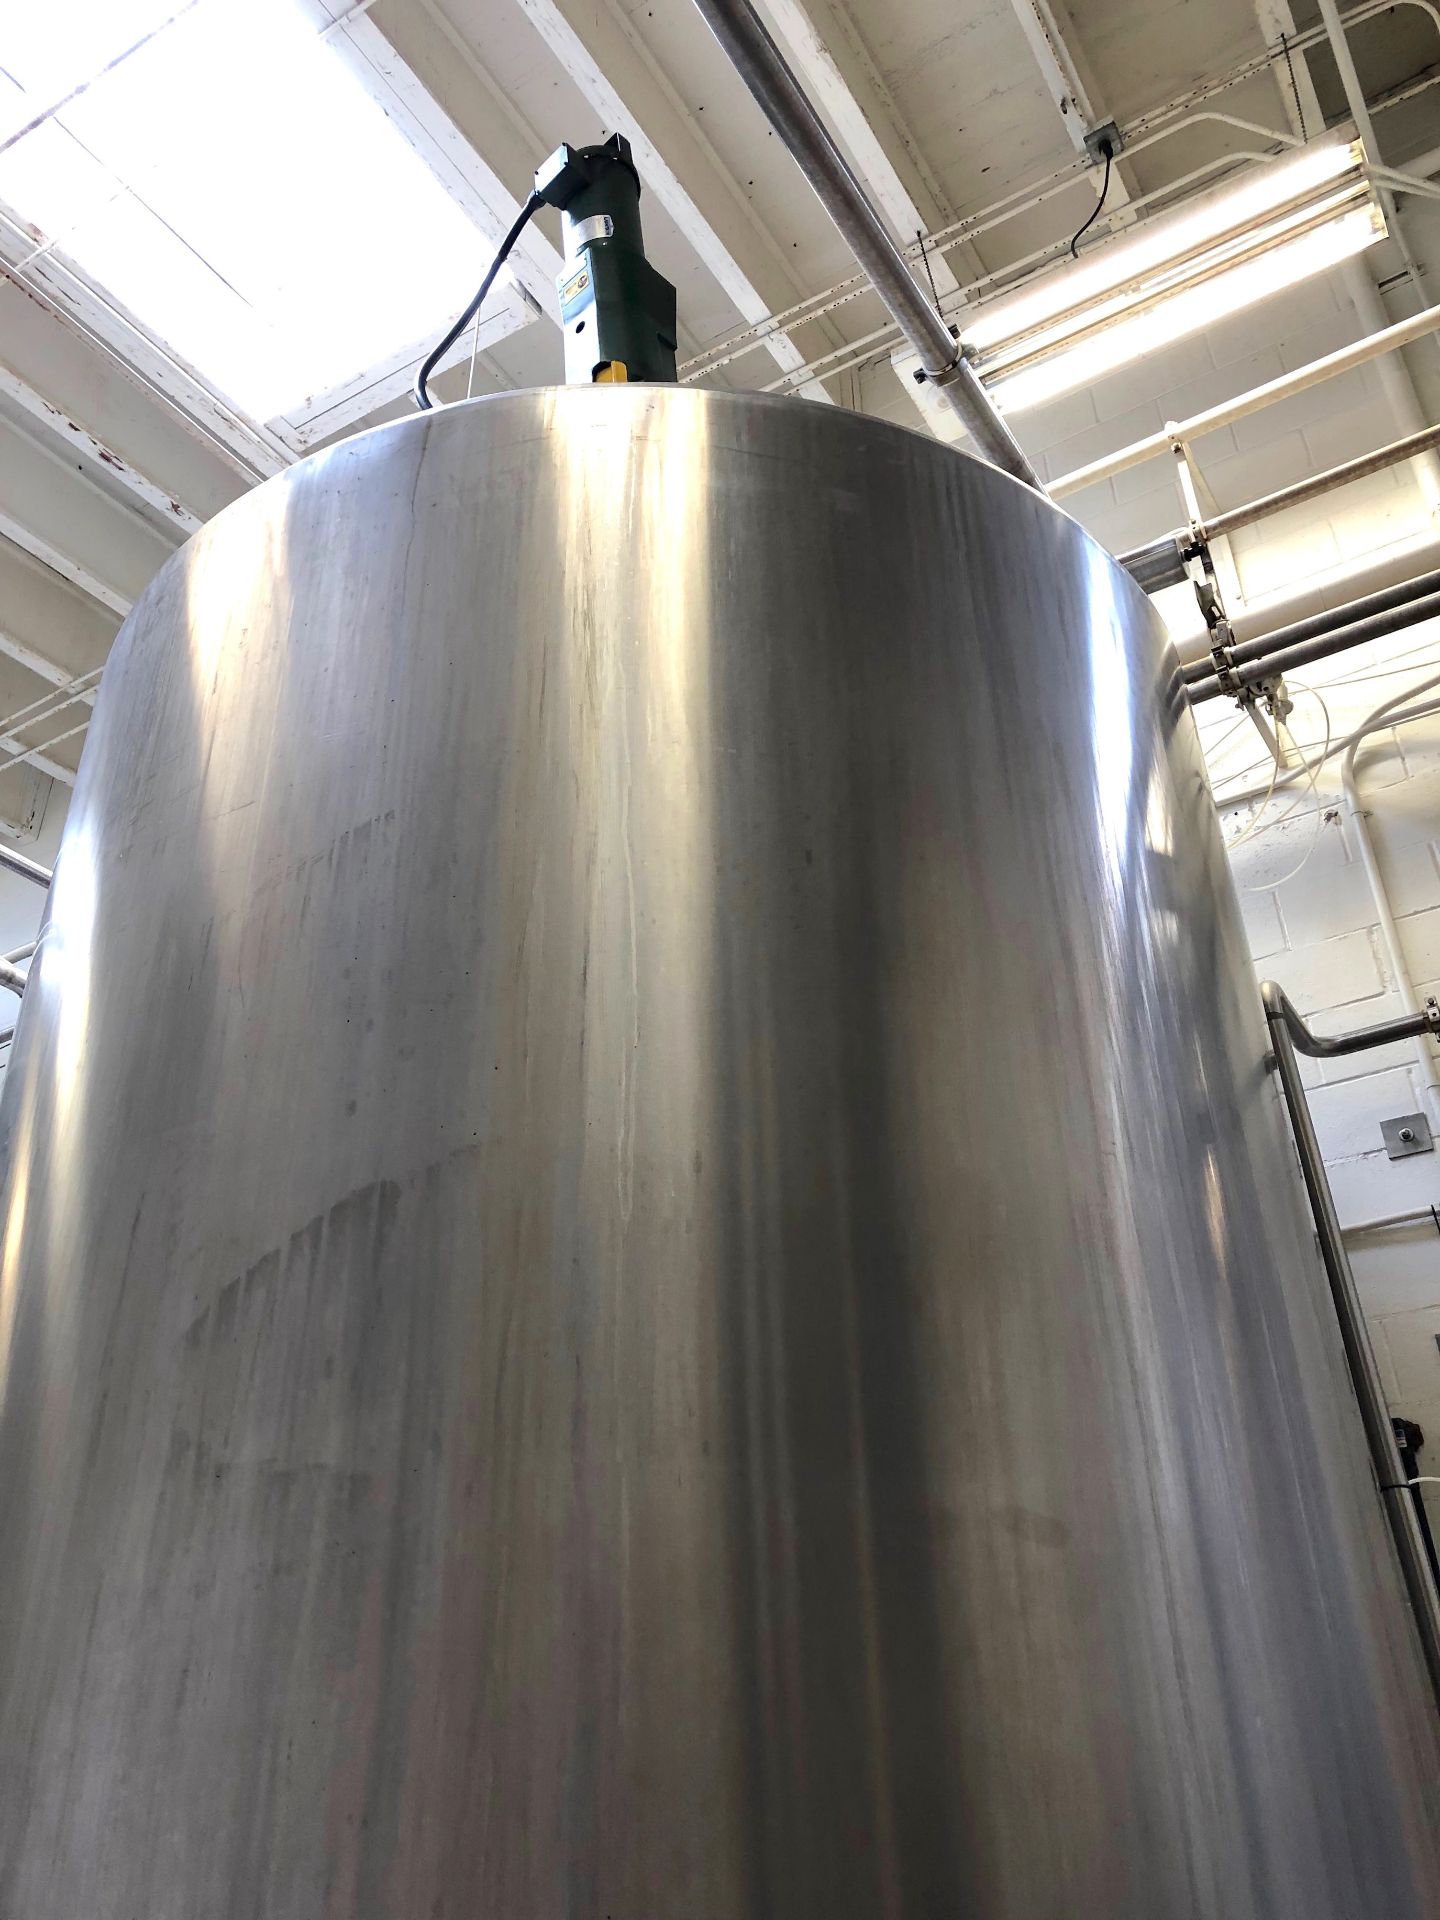 Cherry Burrell 4000 Gallon Stainless Steel Vertical Mixing Tank - Image 3 of 4